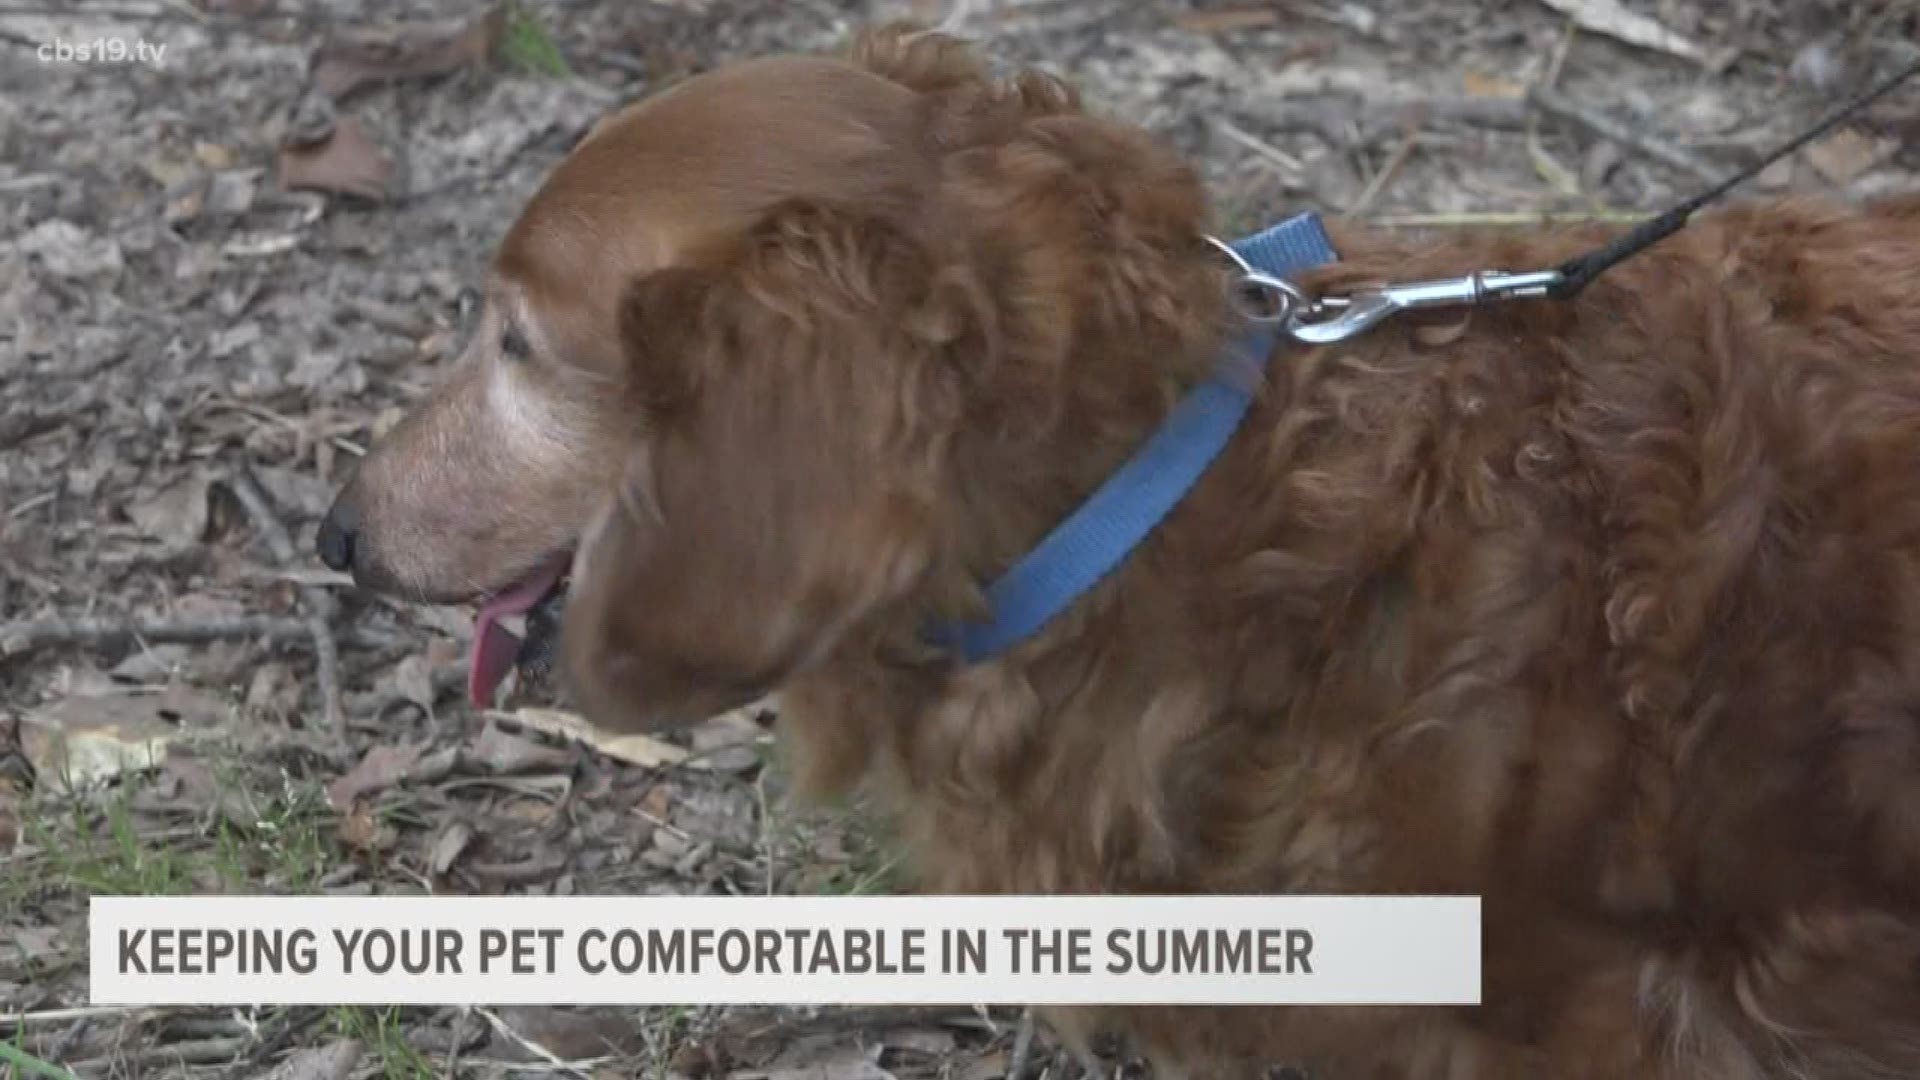 As temperatures continue to rise it's important to remember to protect your pets from the hot summer days. A local vet provides tips to keeping your pets safe and comfortable in the summer.